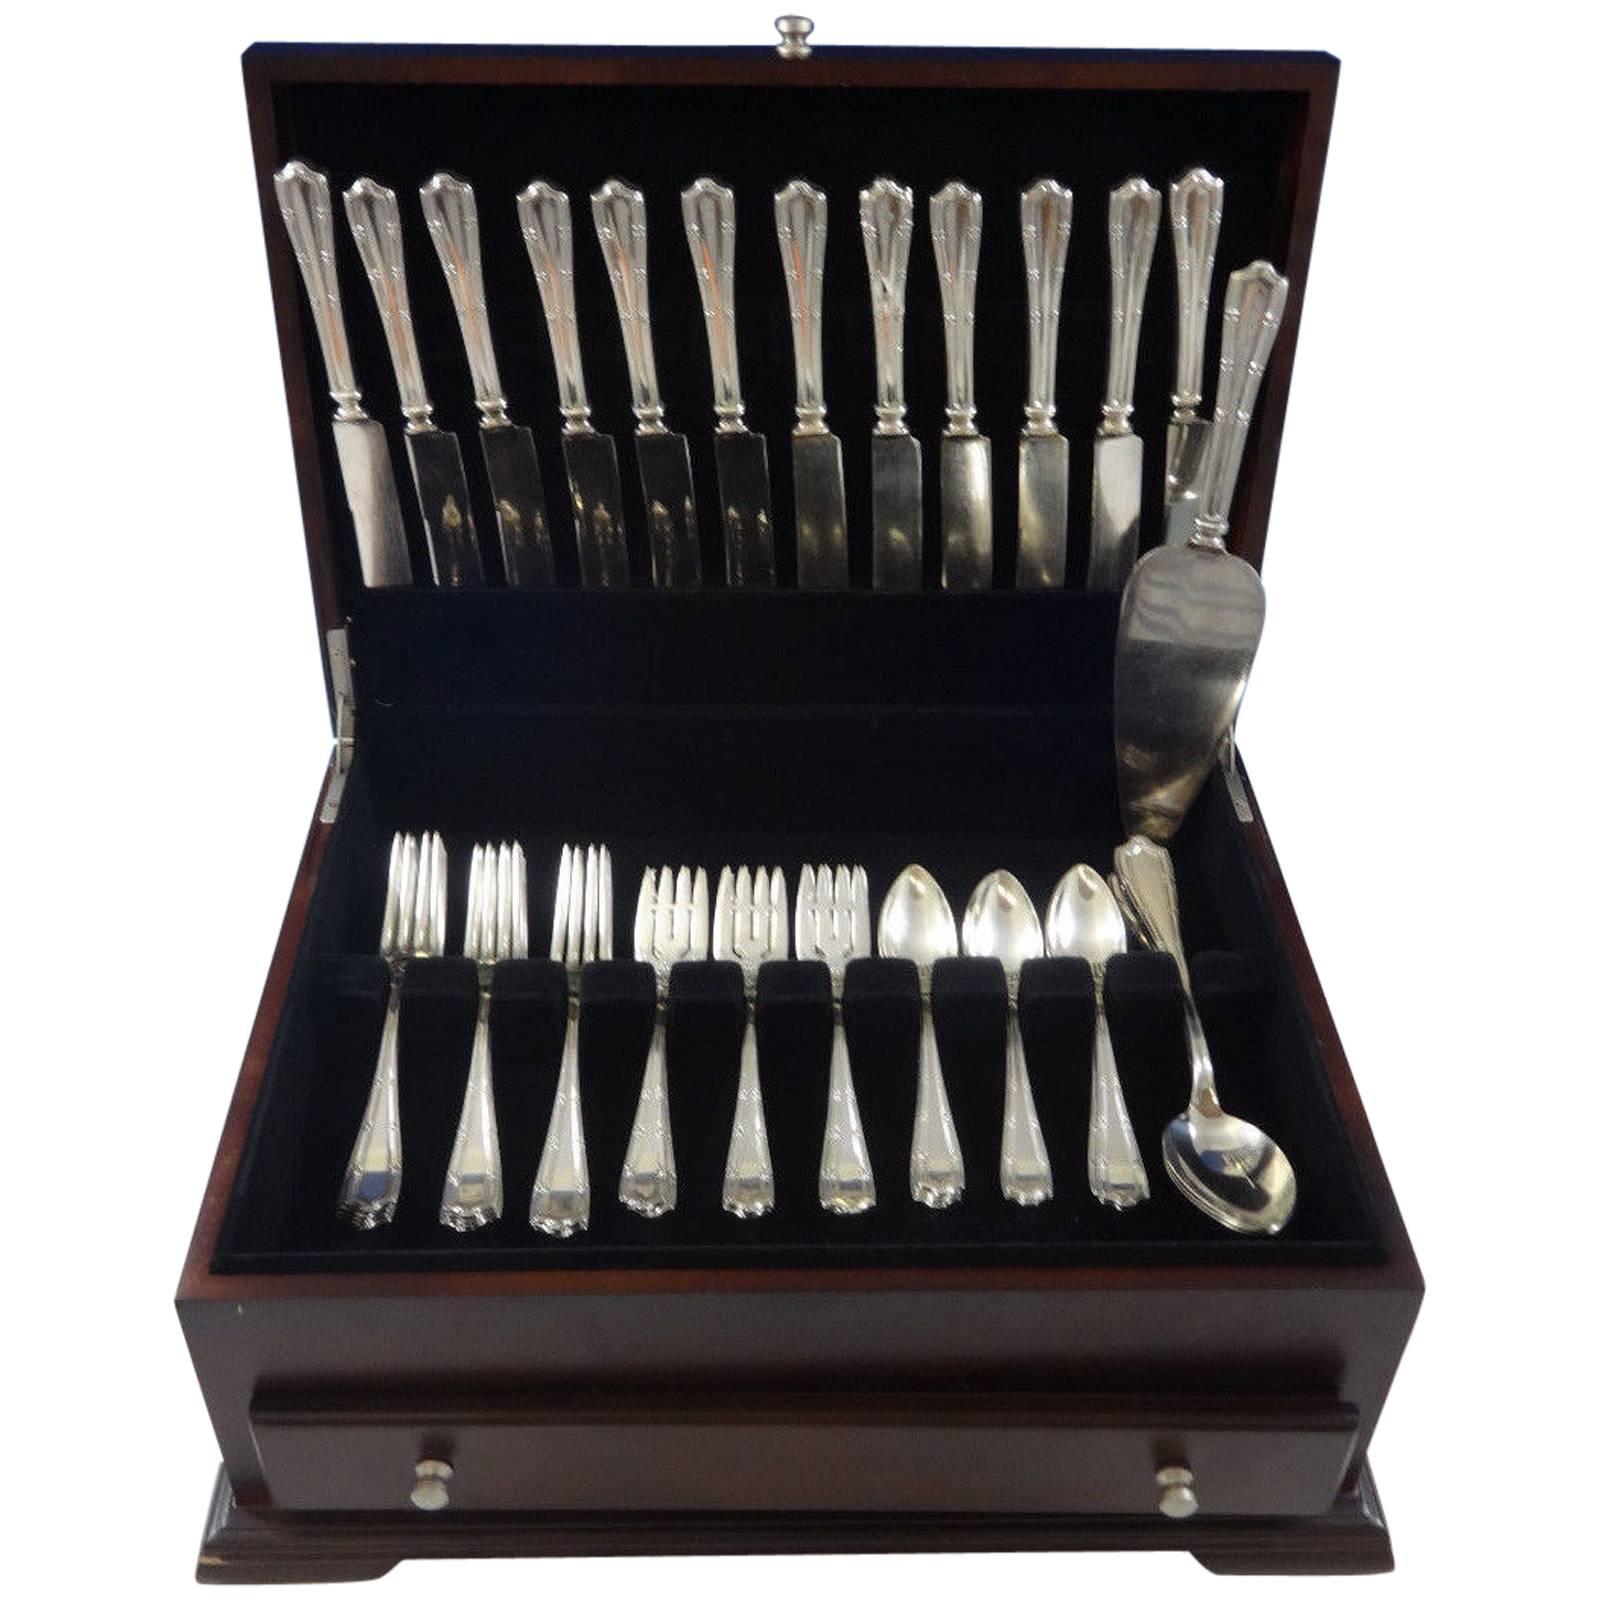 Francis I by Alvin sterling silver flatware set - 52 pieces. This set includes: 

12 knives with silverplated Old French blades, 8 7/8